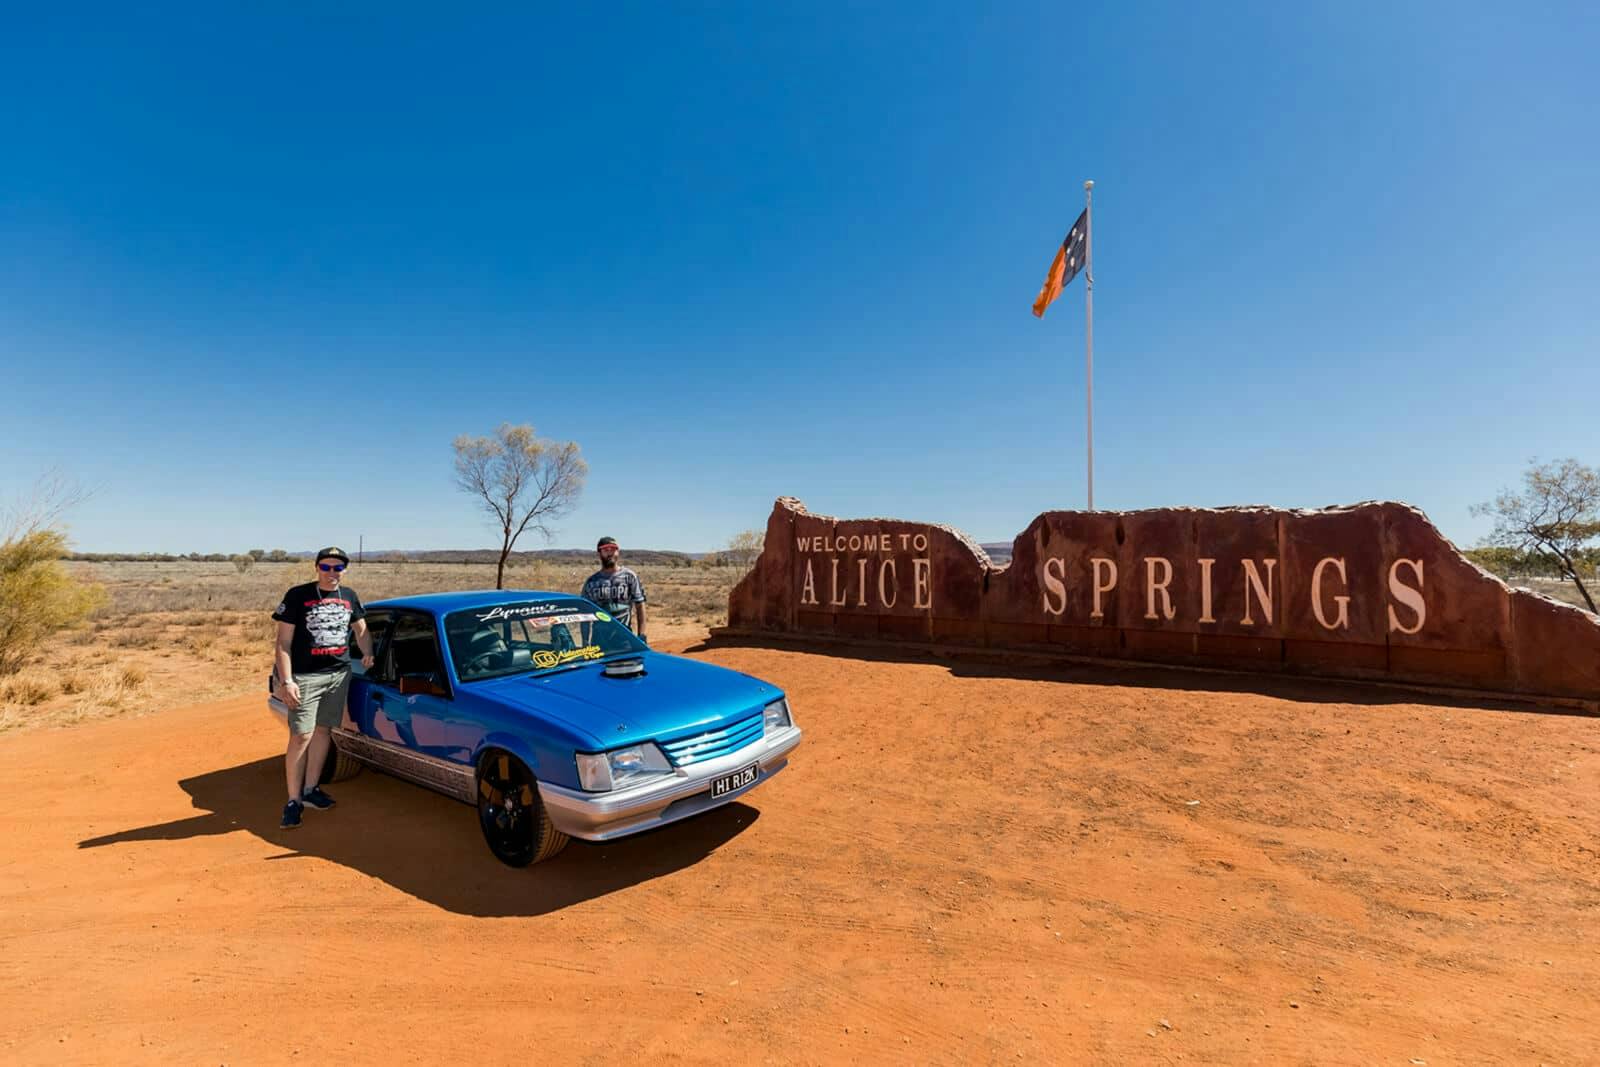 Classic car in front of Alice Springs sign